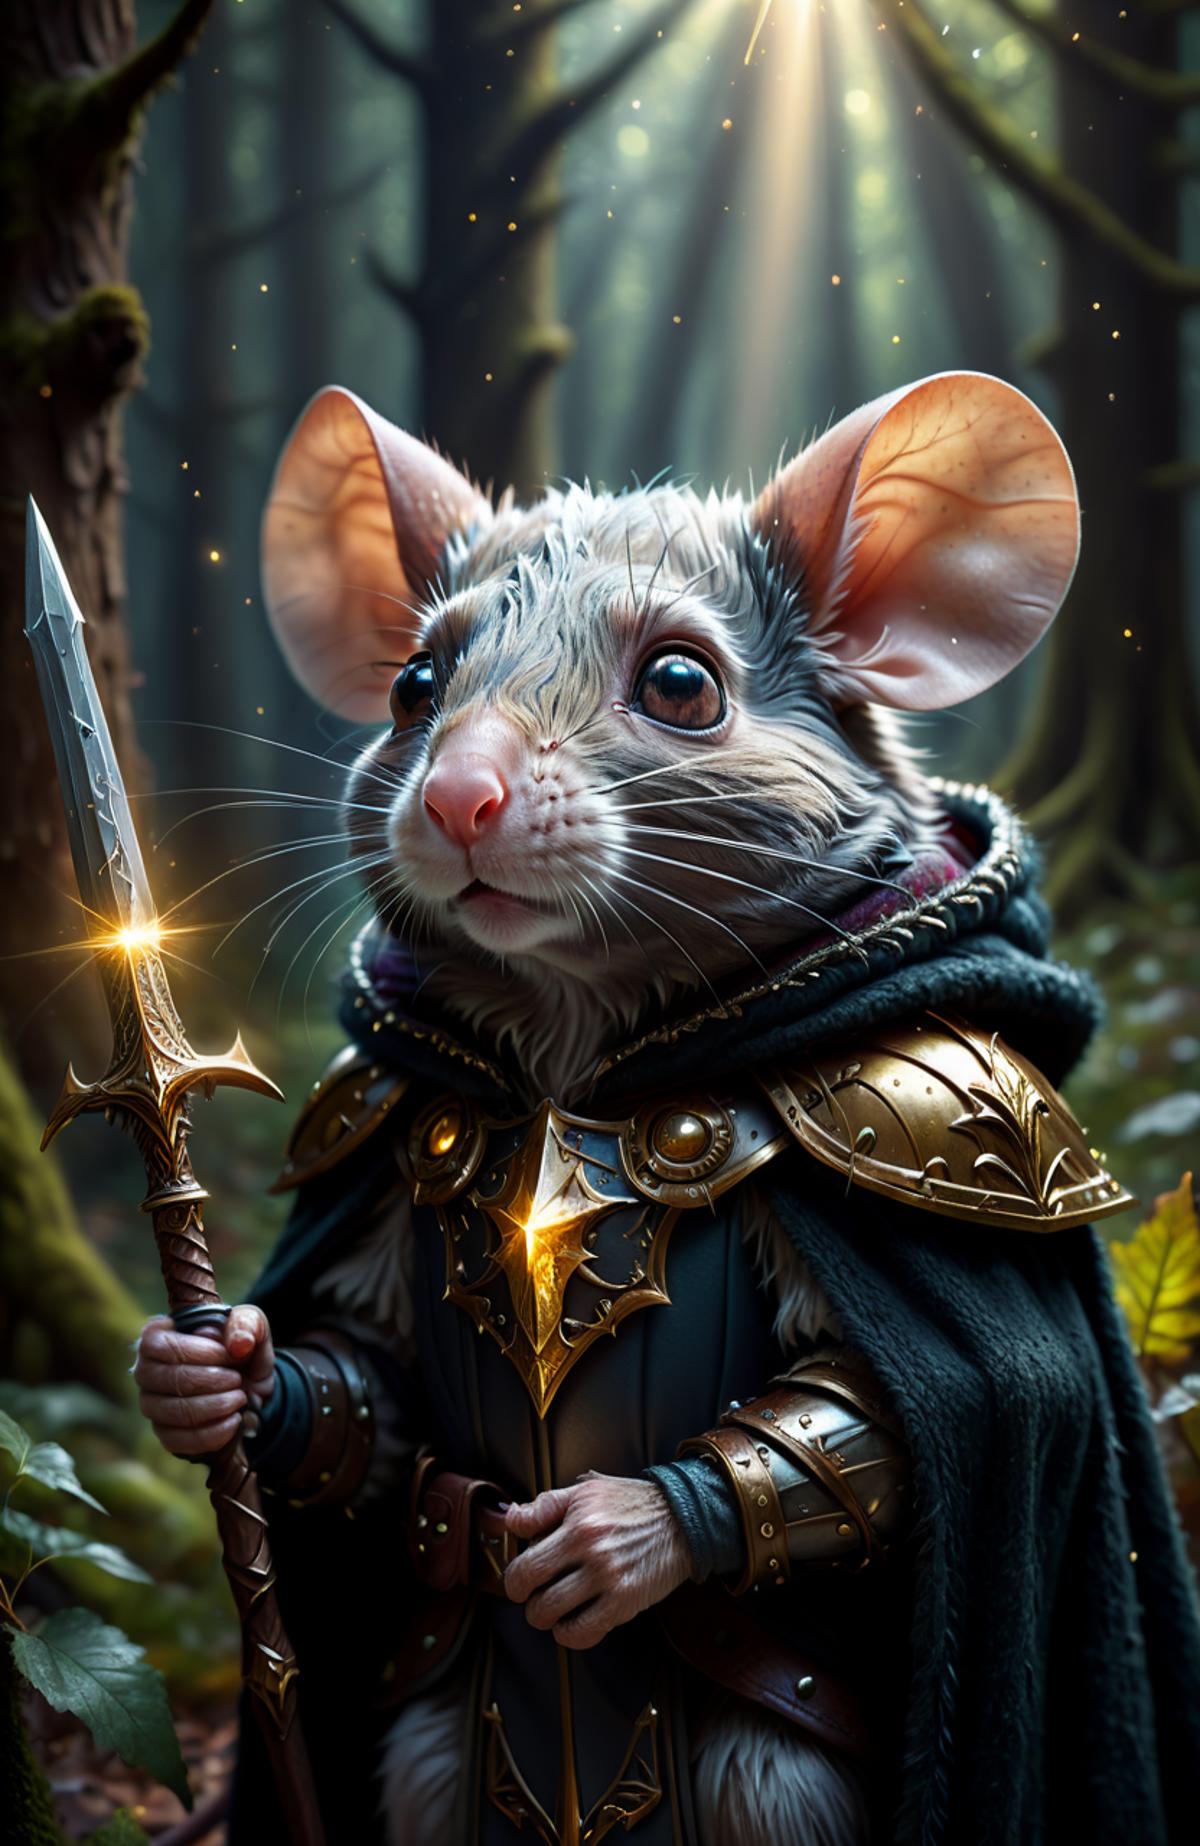 Fantasy Illustration of a Mouse Knight with a Sword and Armor, Wearing a Cape